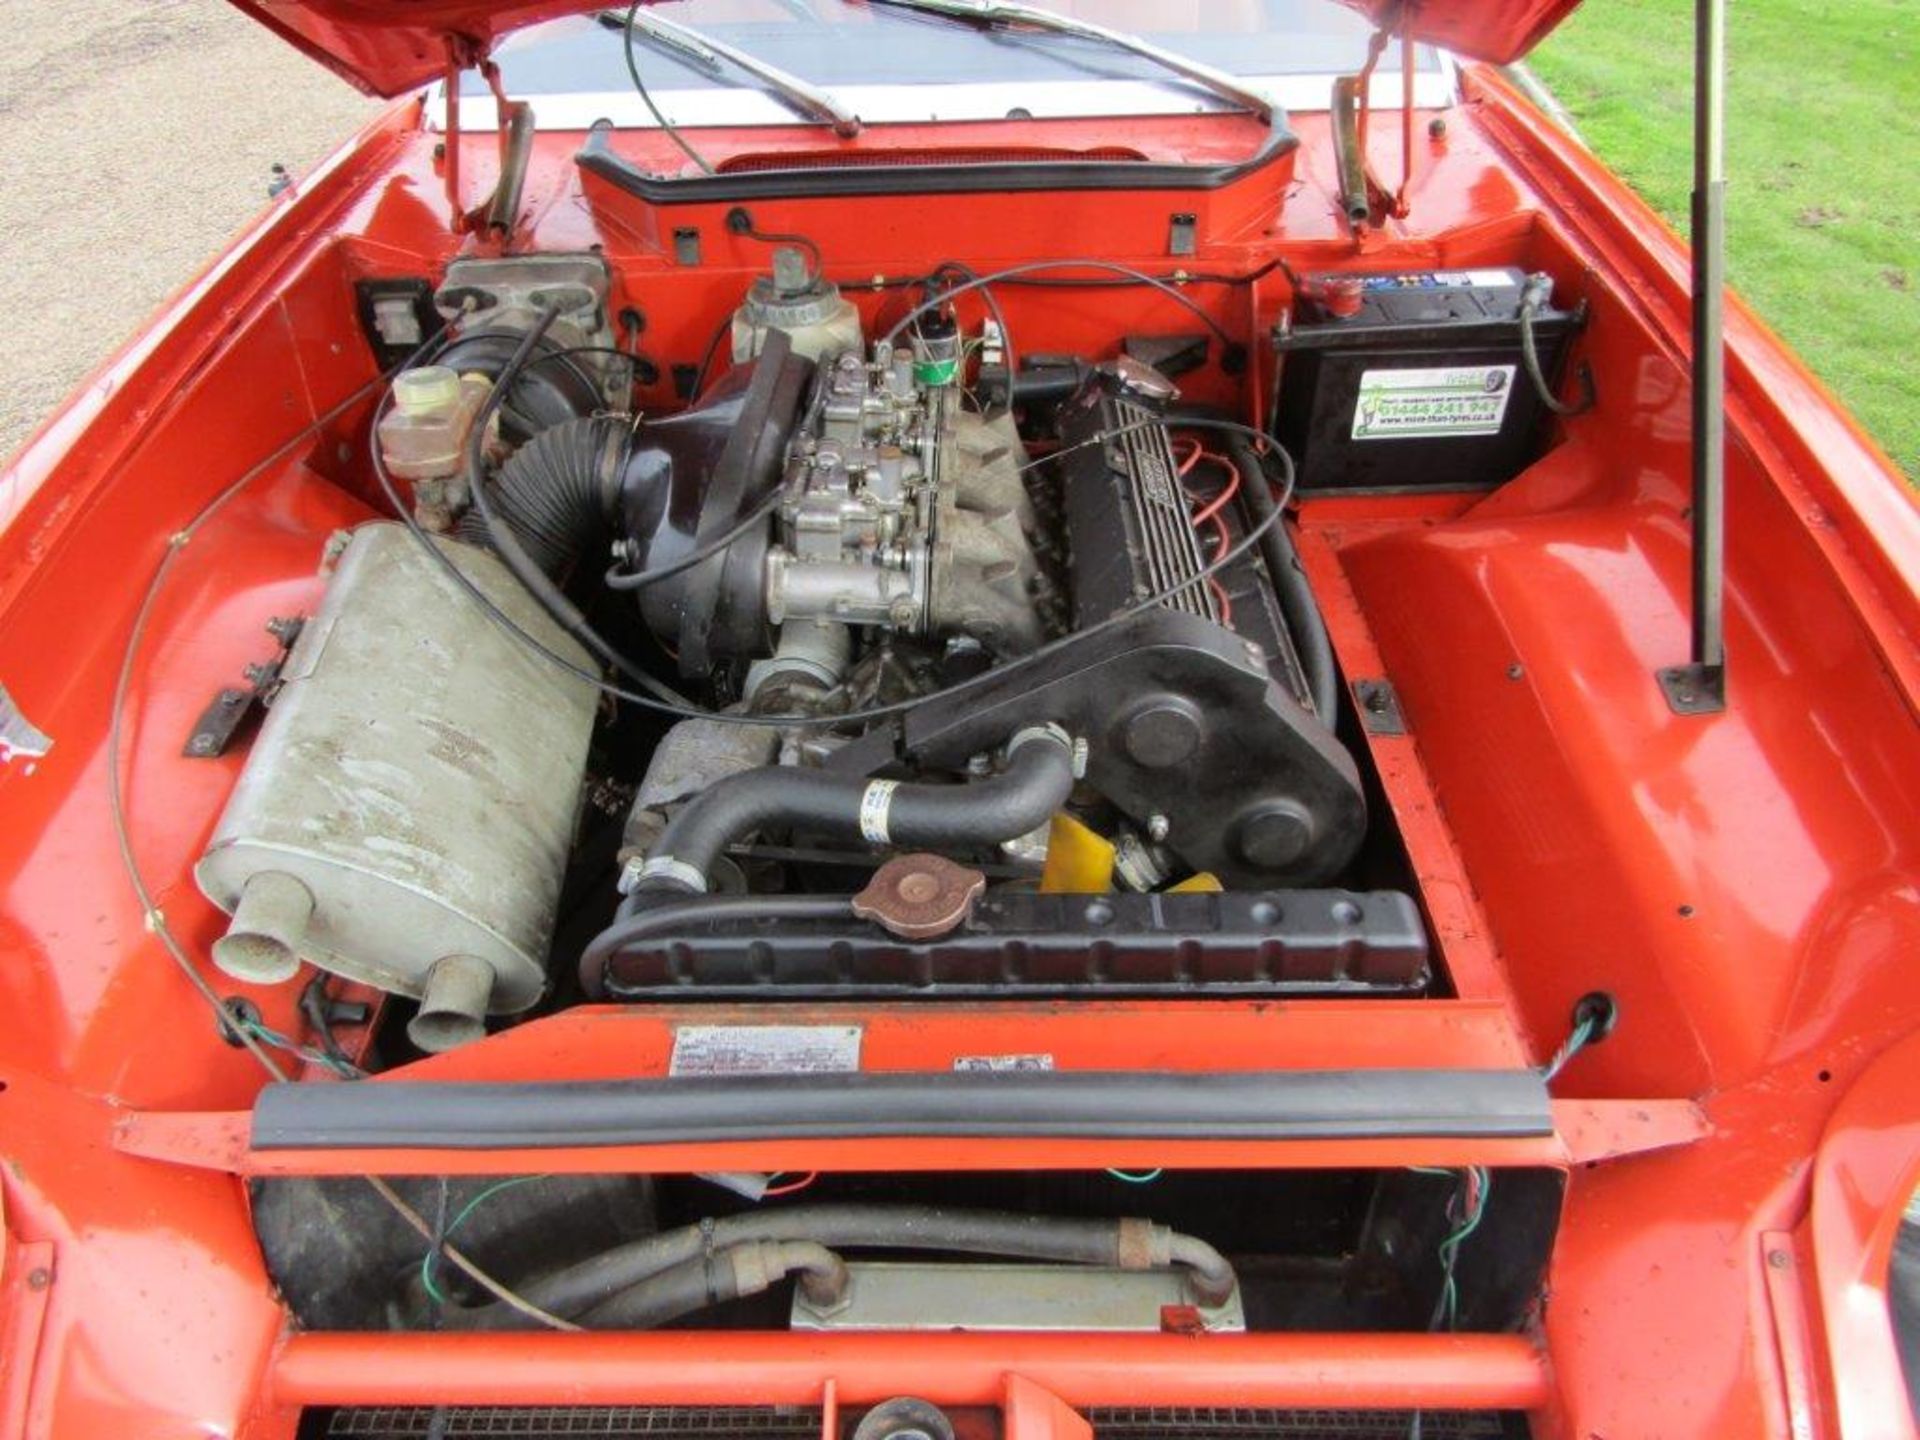 1974 Jensen Healey MK II 21,800 miles from new - Image 10 of 12